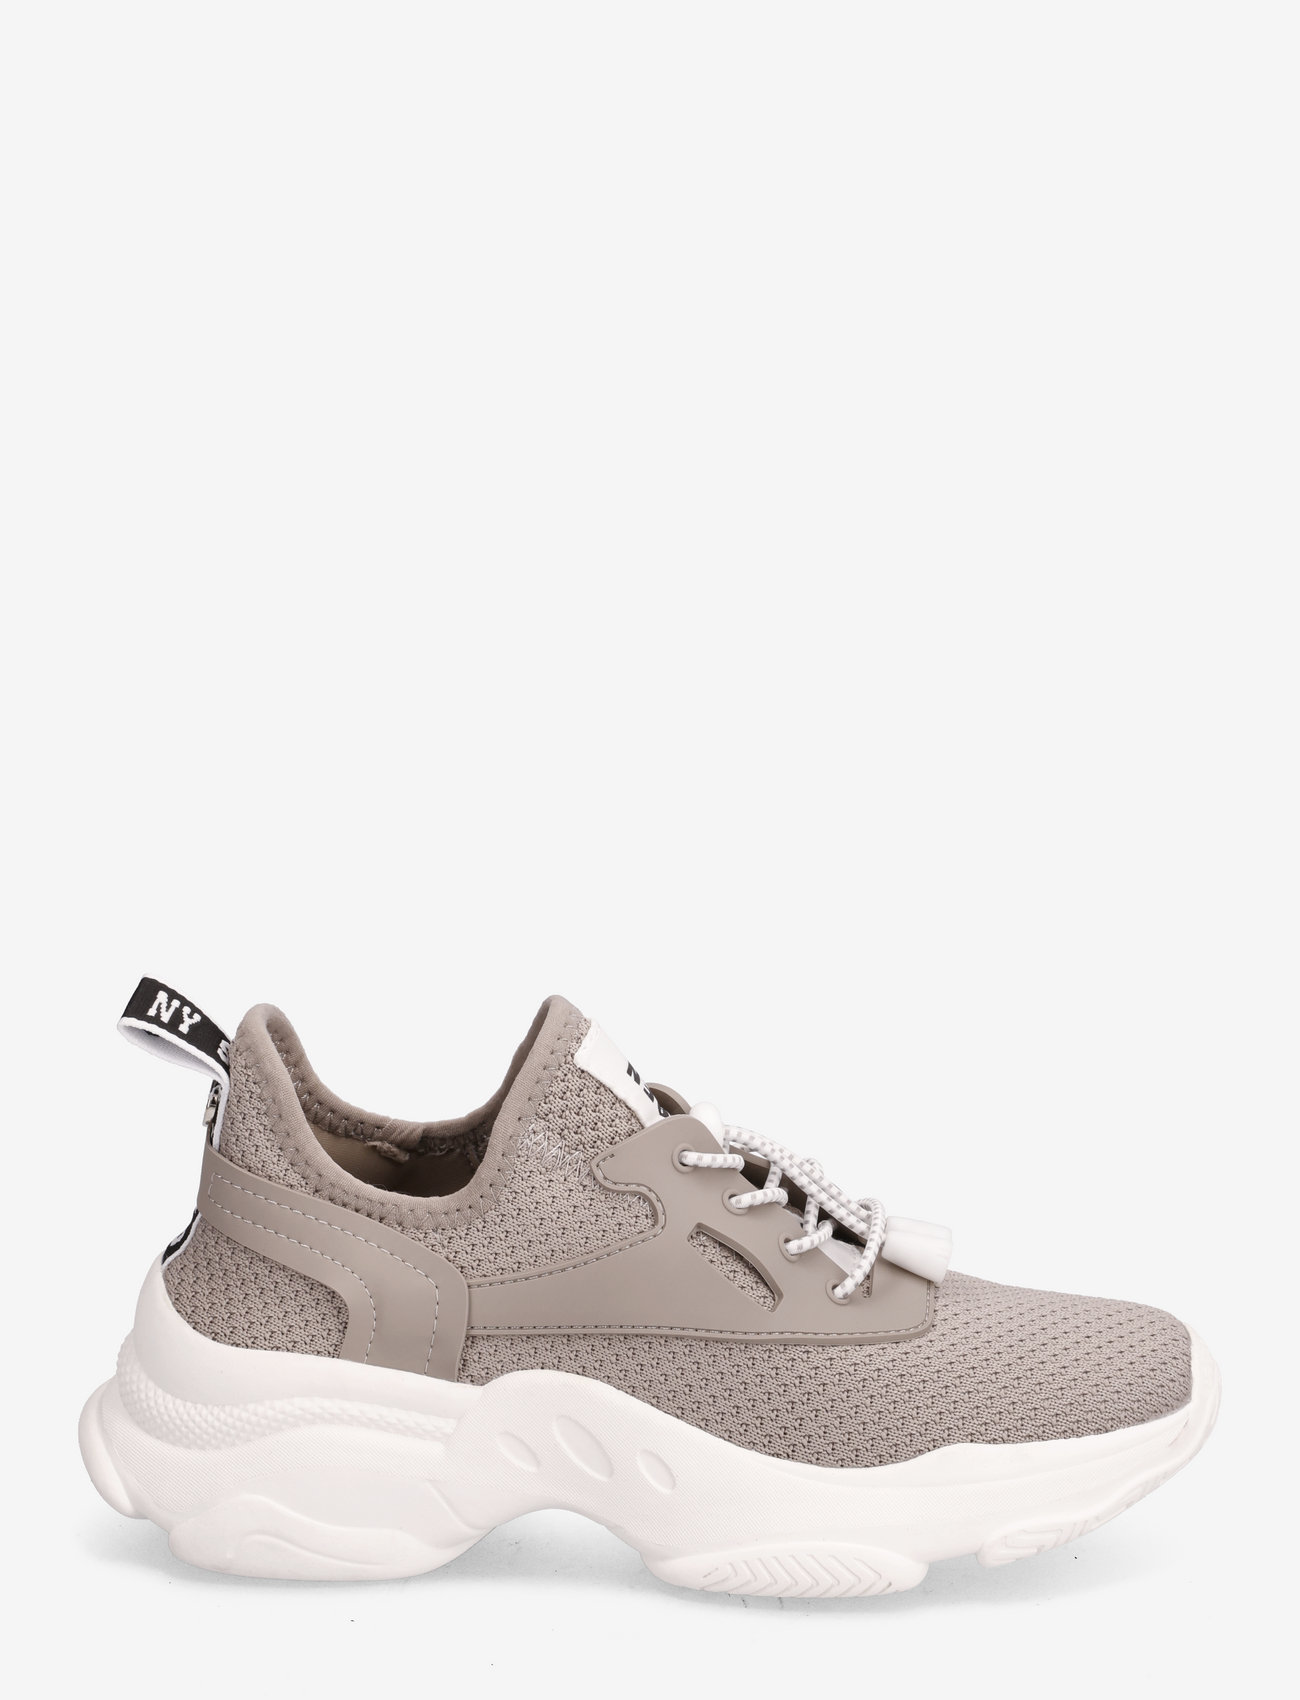 Steve Madden - Match-E Sneaker - low top sneakers - taupe - 1